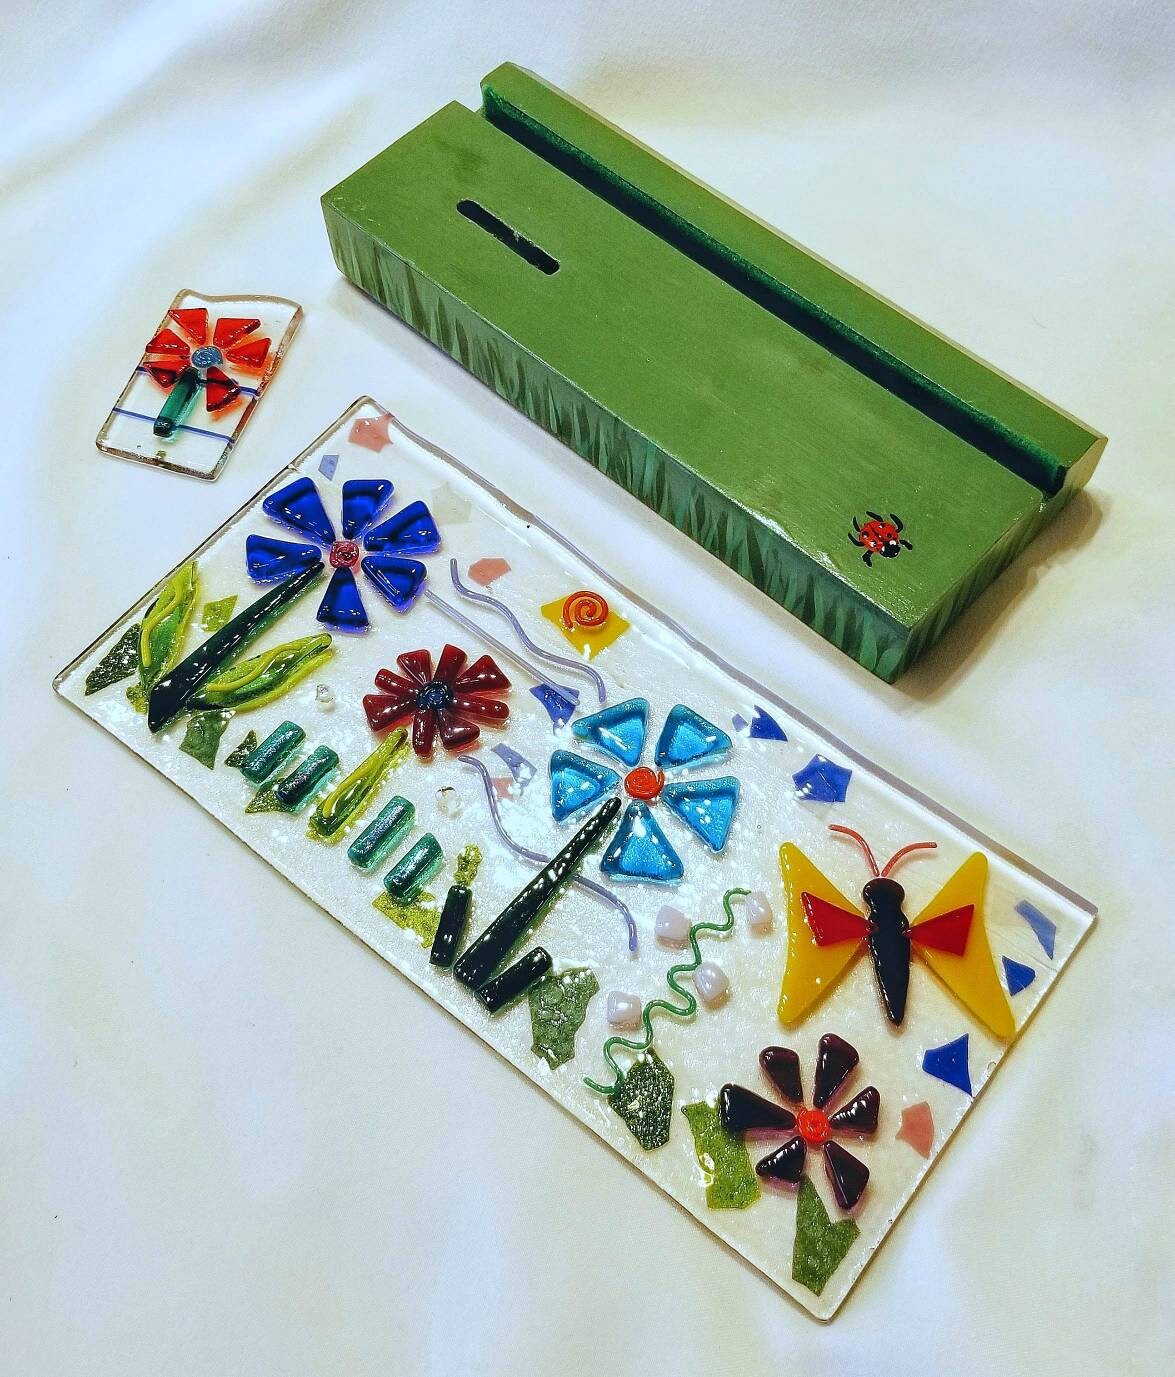 Garden Row of fused glass flowers & butterfly/painted wood base for Table Top, Desk or Window Ledge /Art Accent/Centerpiece